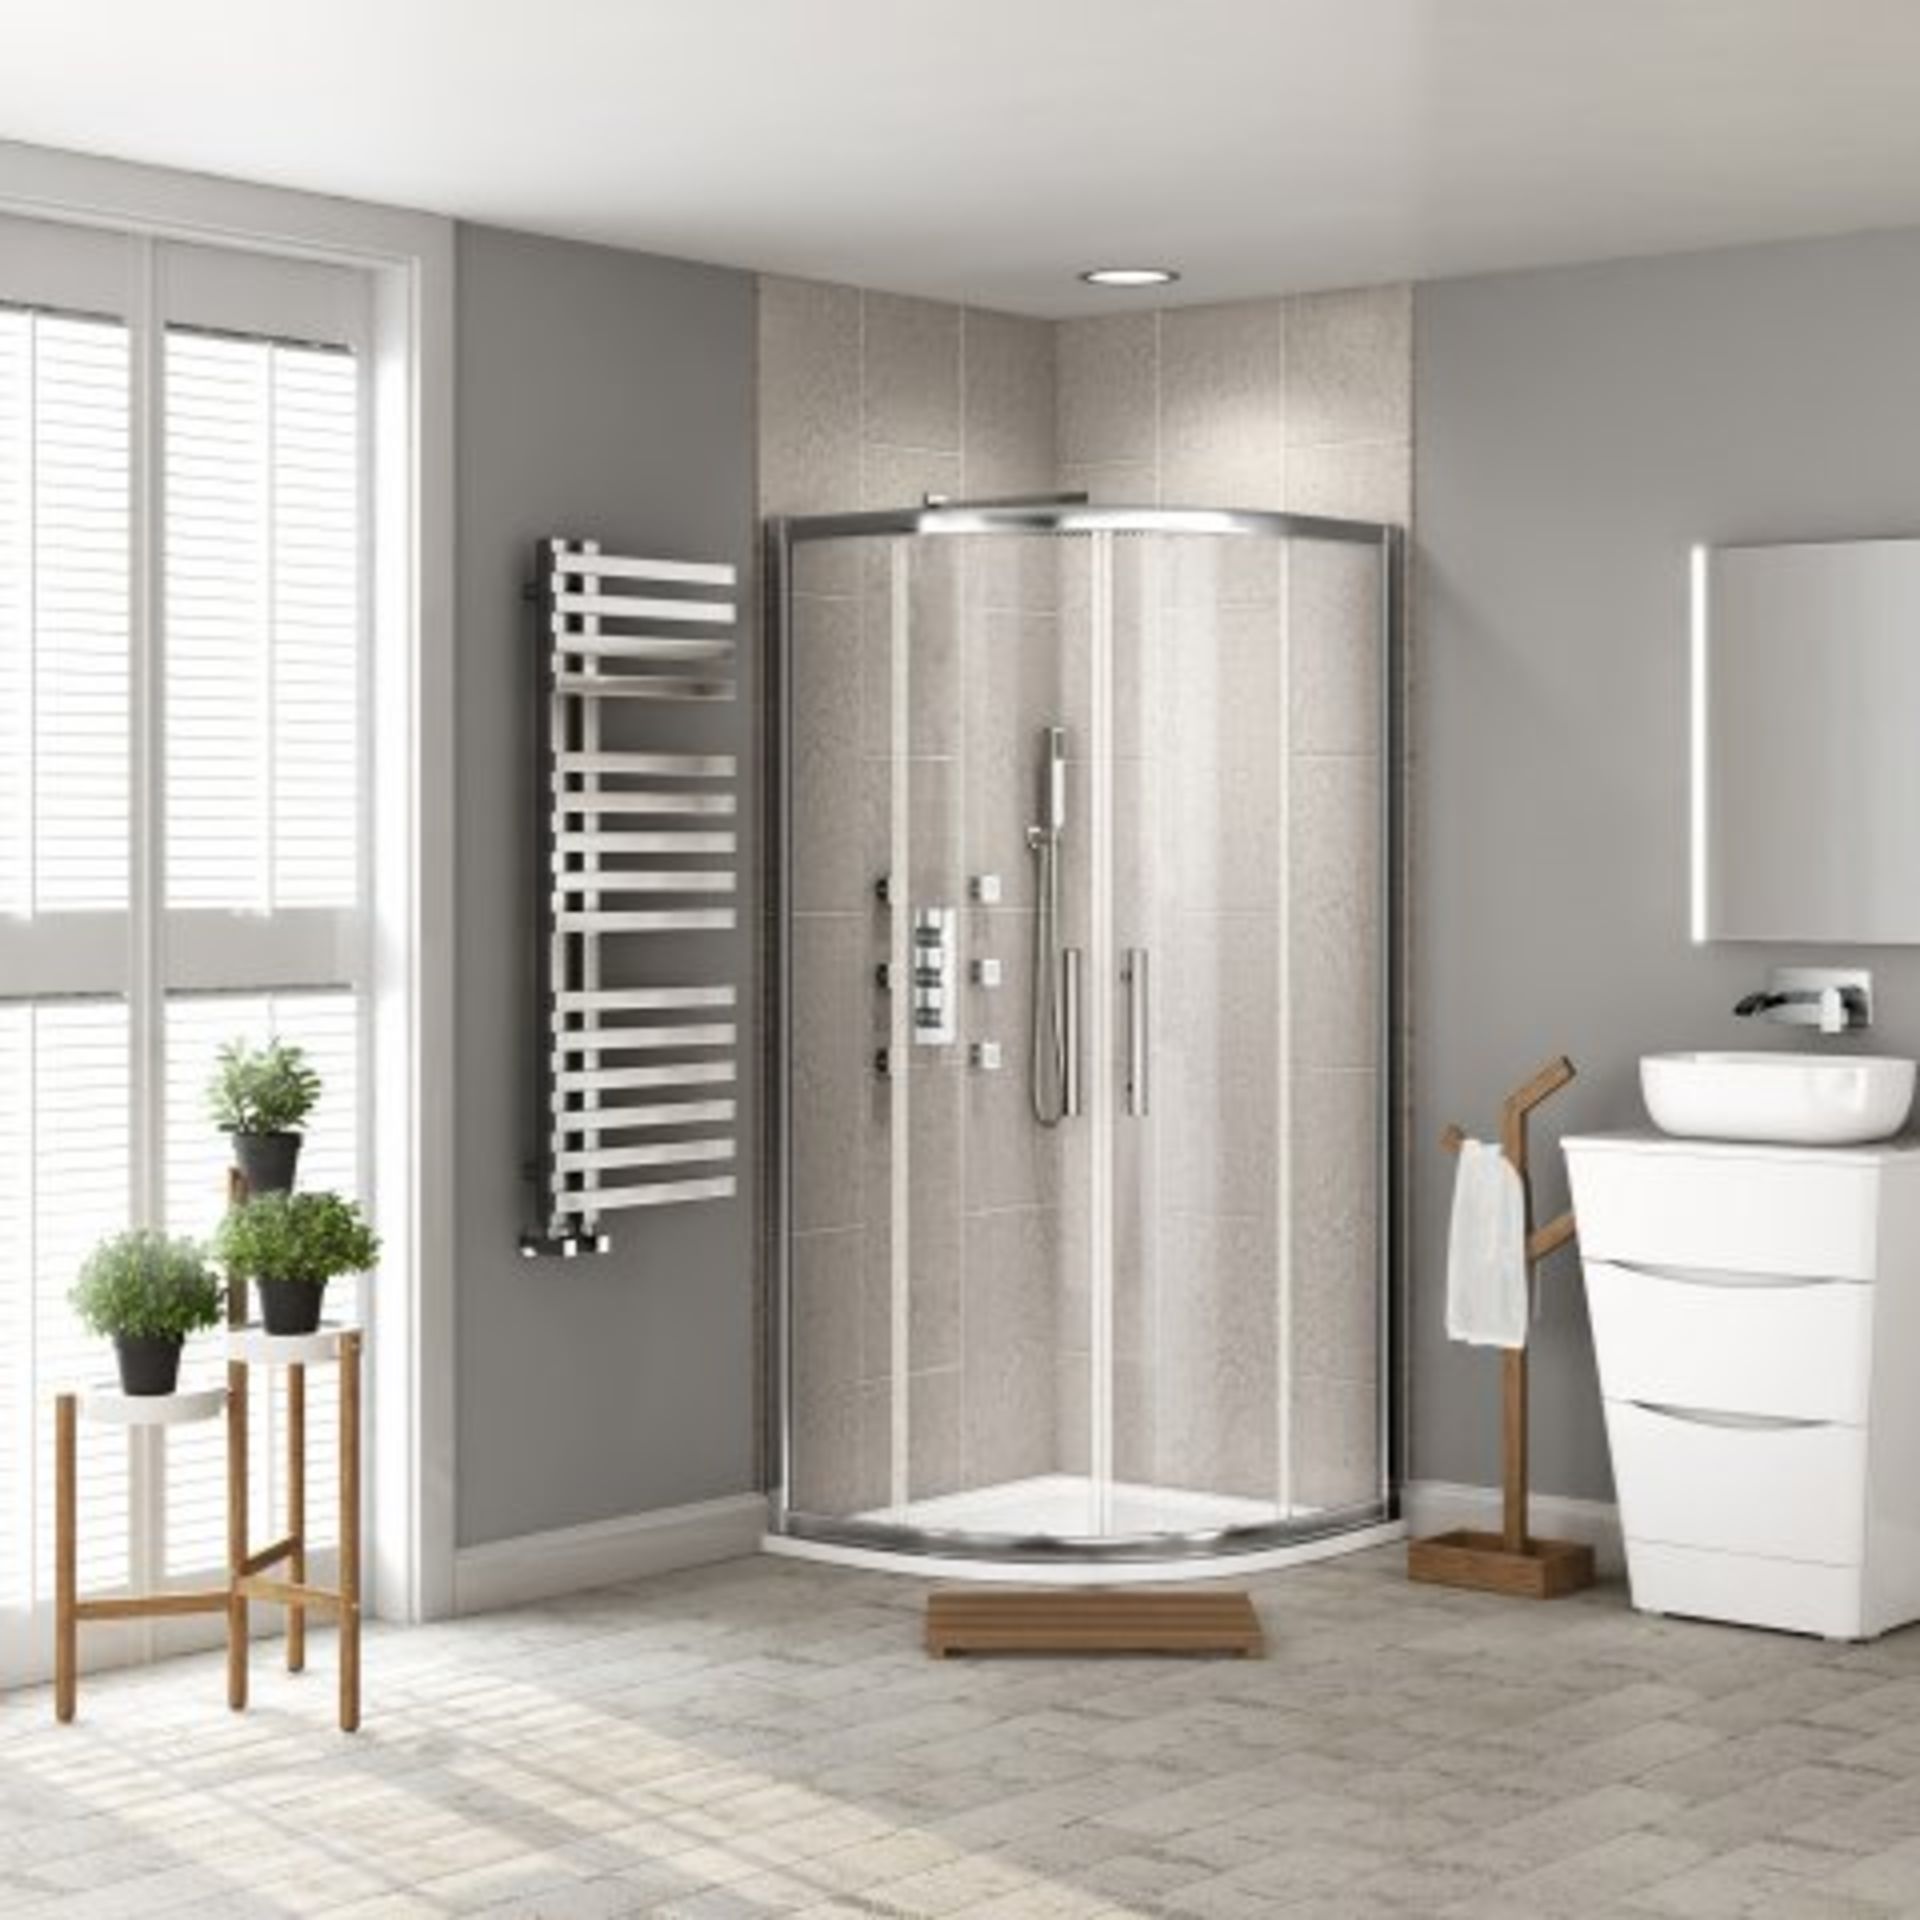 (I16) 800x800mm - 8mm - Premium EasyClean Quadrant Shower Enclosure. RRP £399.99. Do right by your - Image 5 of 5